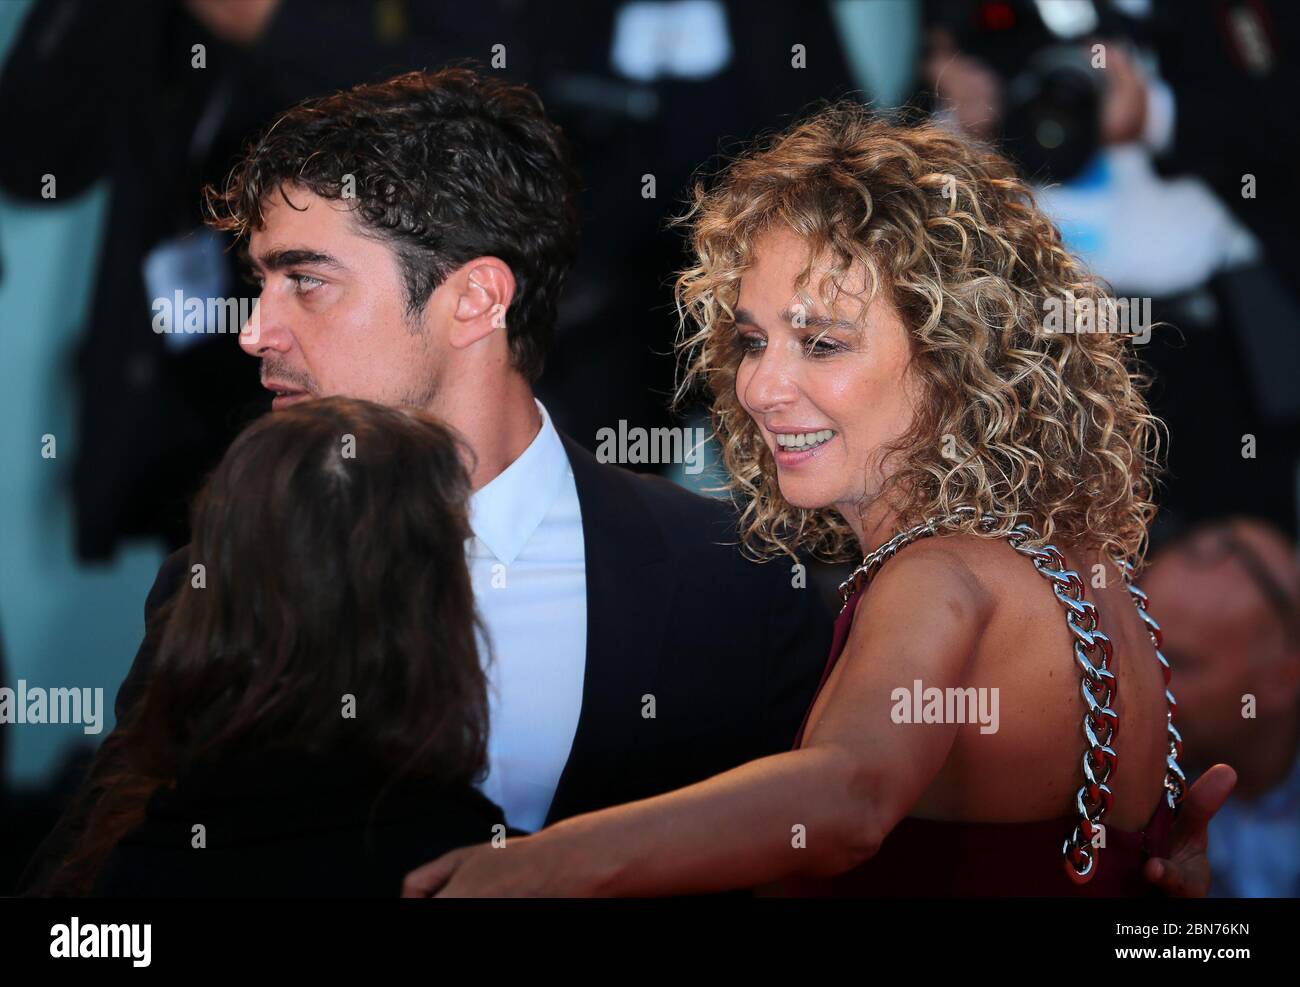 Actress Valeria Golino and actor Riccardo Scamarcio attends the red carpet of the Closing Ceremony during the 72nd Venice Film Festival Stock Photo